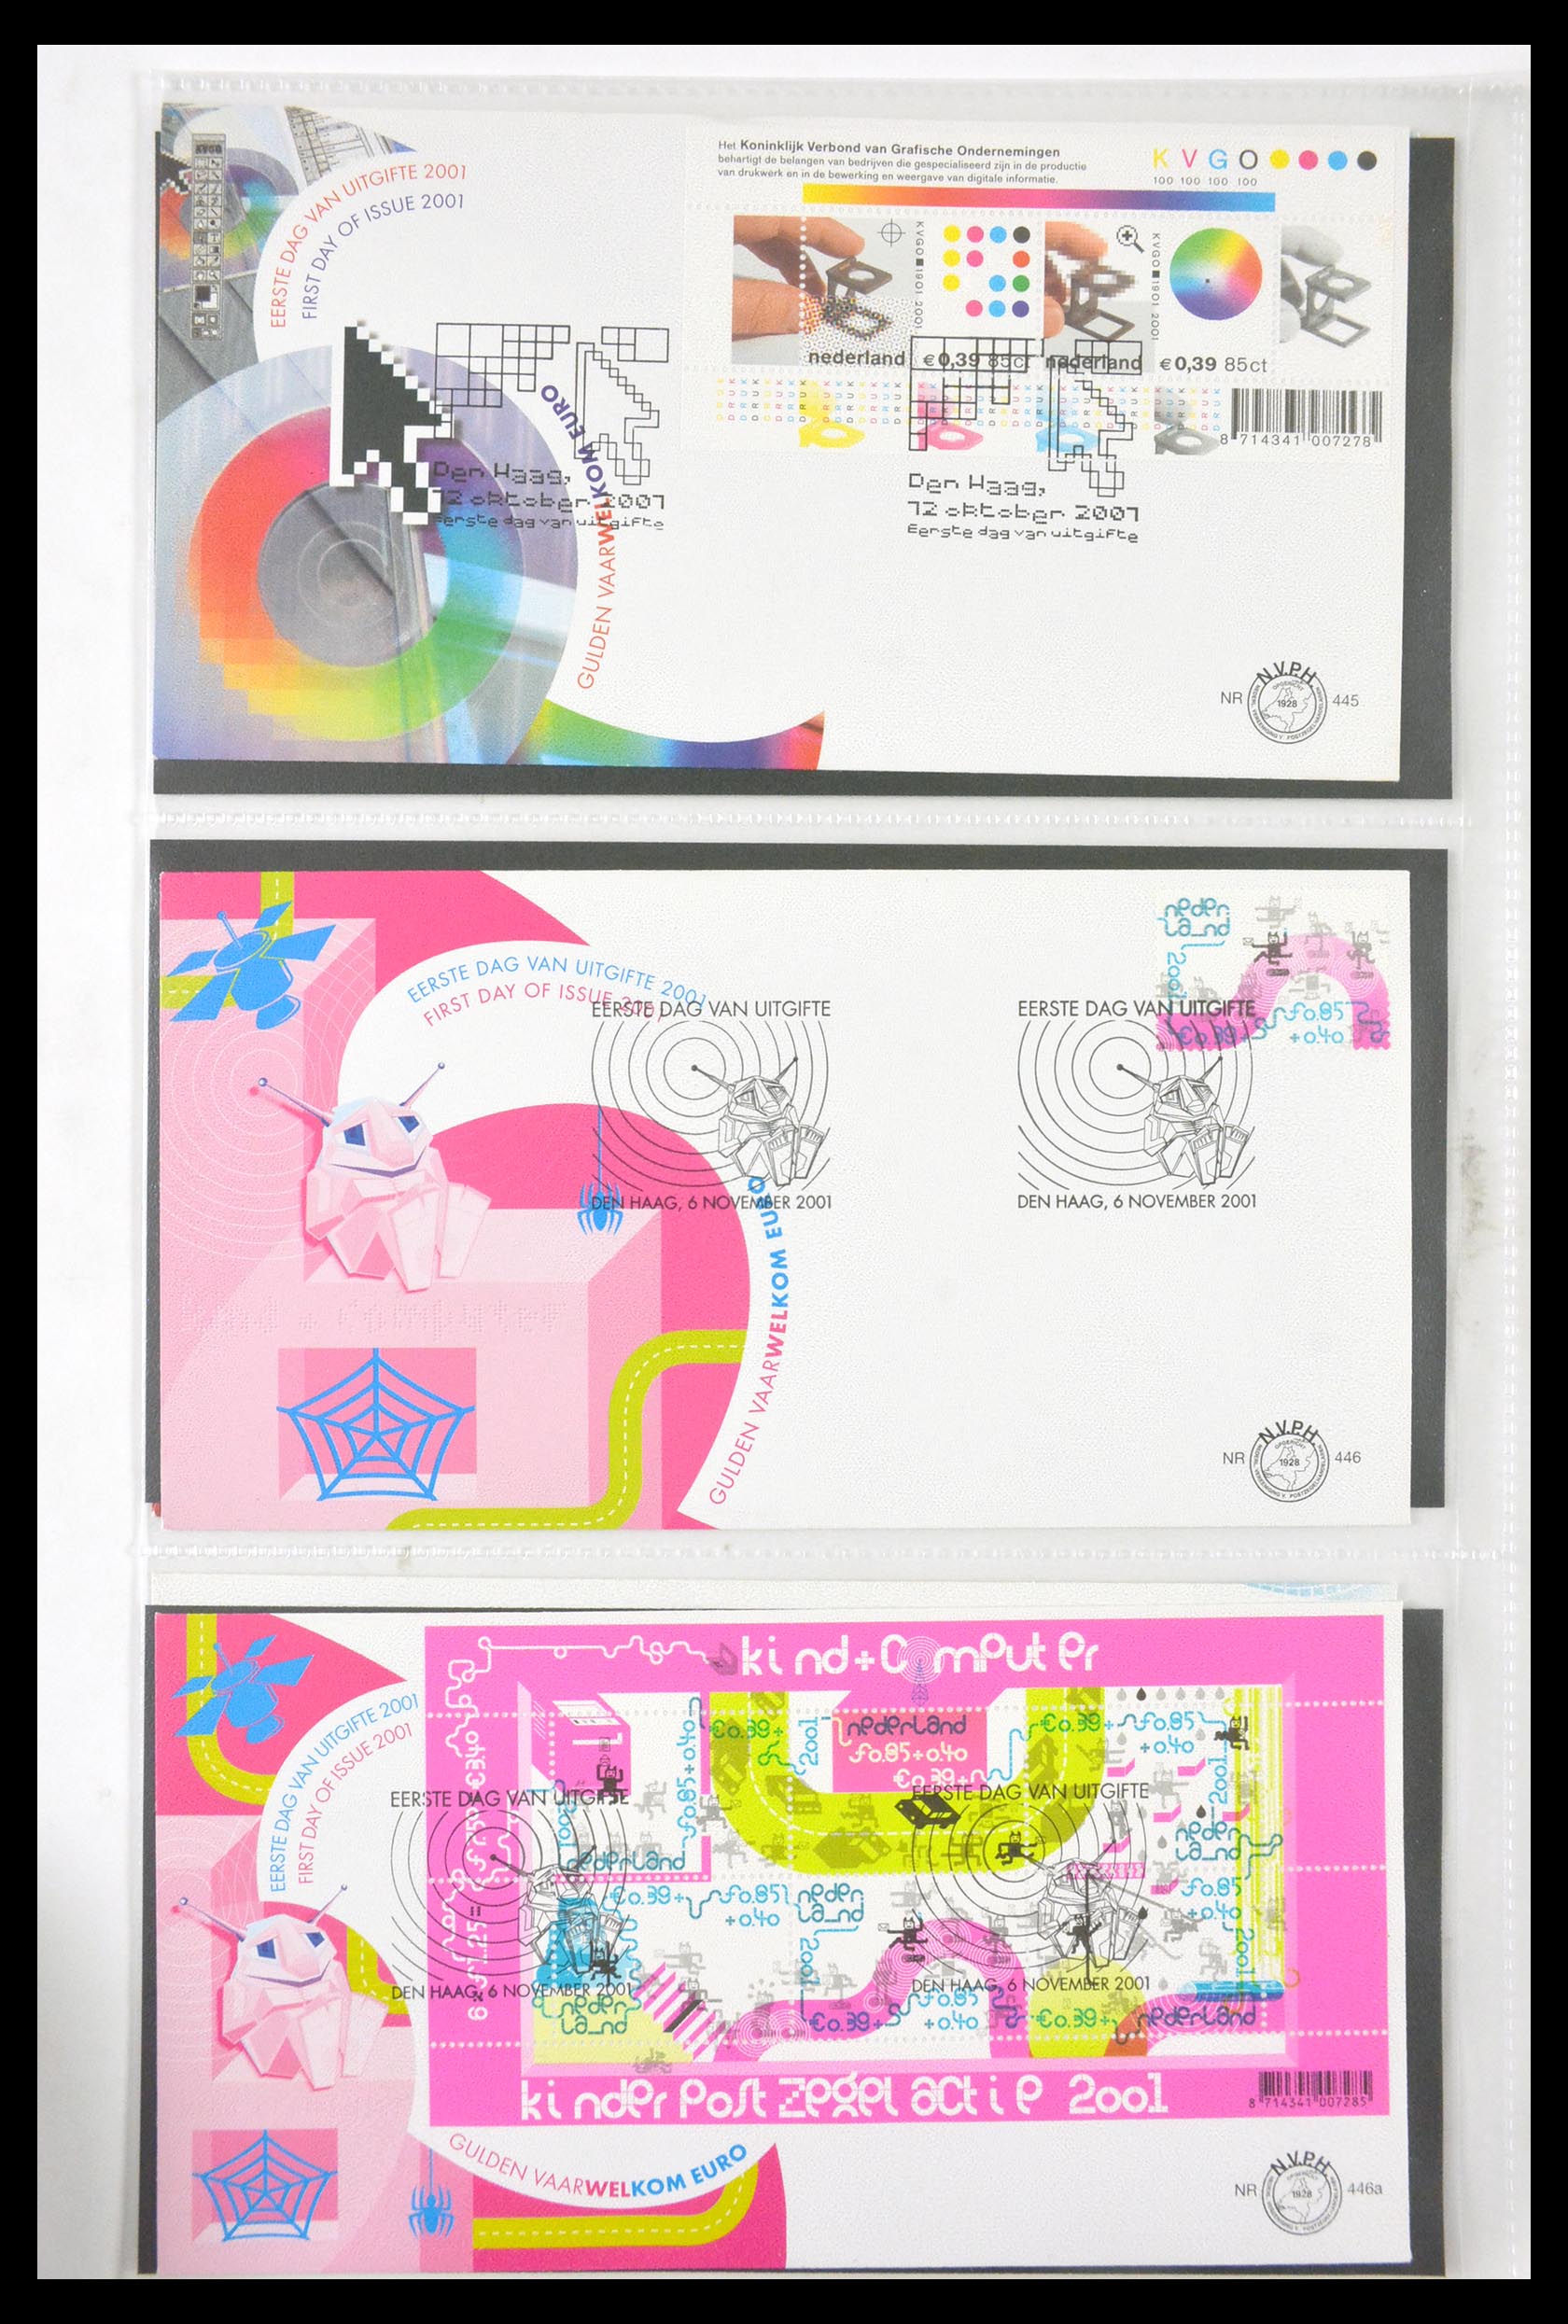 29850 004 - 29850 Netherlands FDC's 2001-2012.